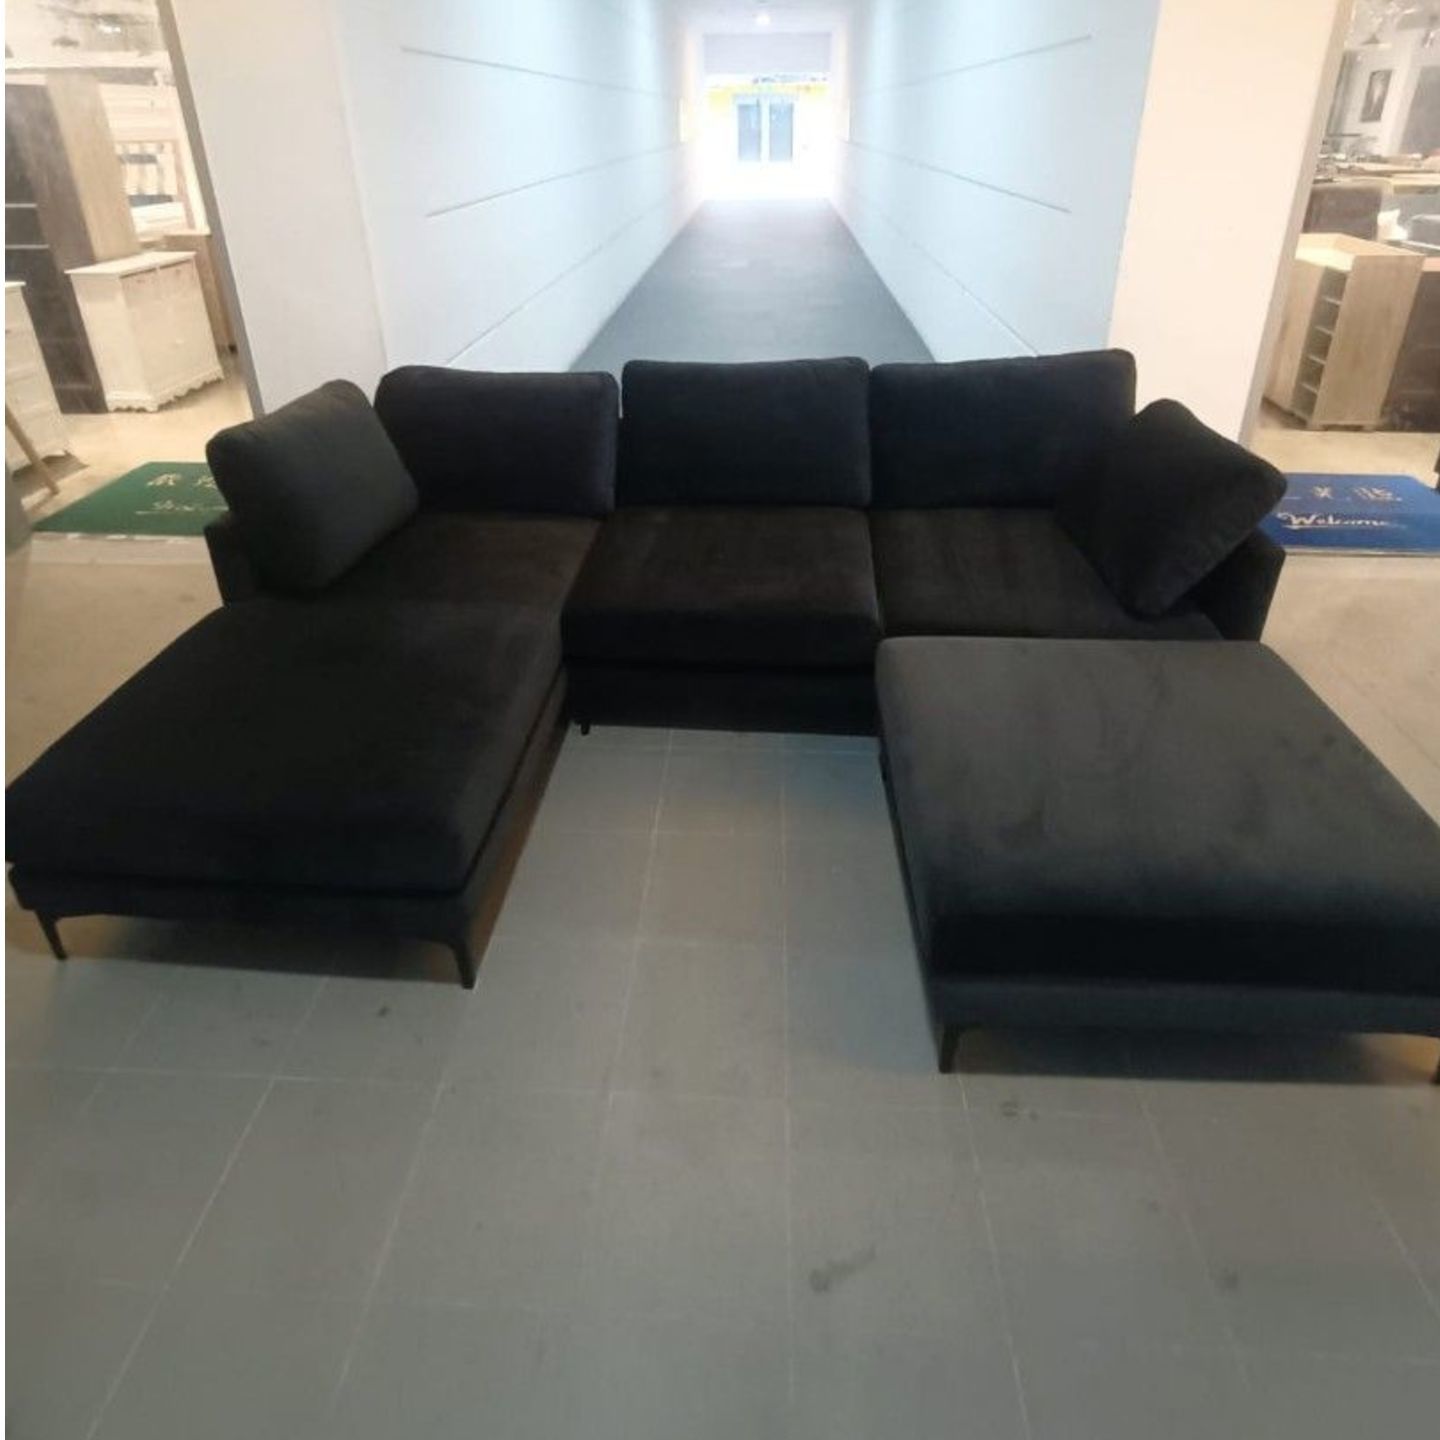 LAMBERT L-Shaped Sectional Sofa in PITCH BLACK VELVET with Ottoman fitted with Black Powder Coated Legs (right when seated)